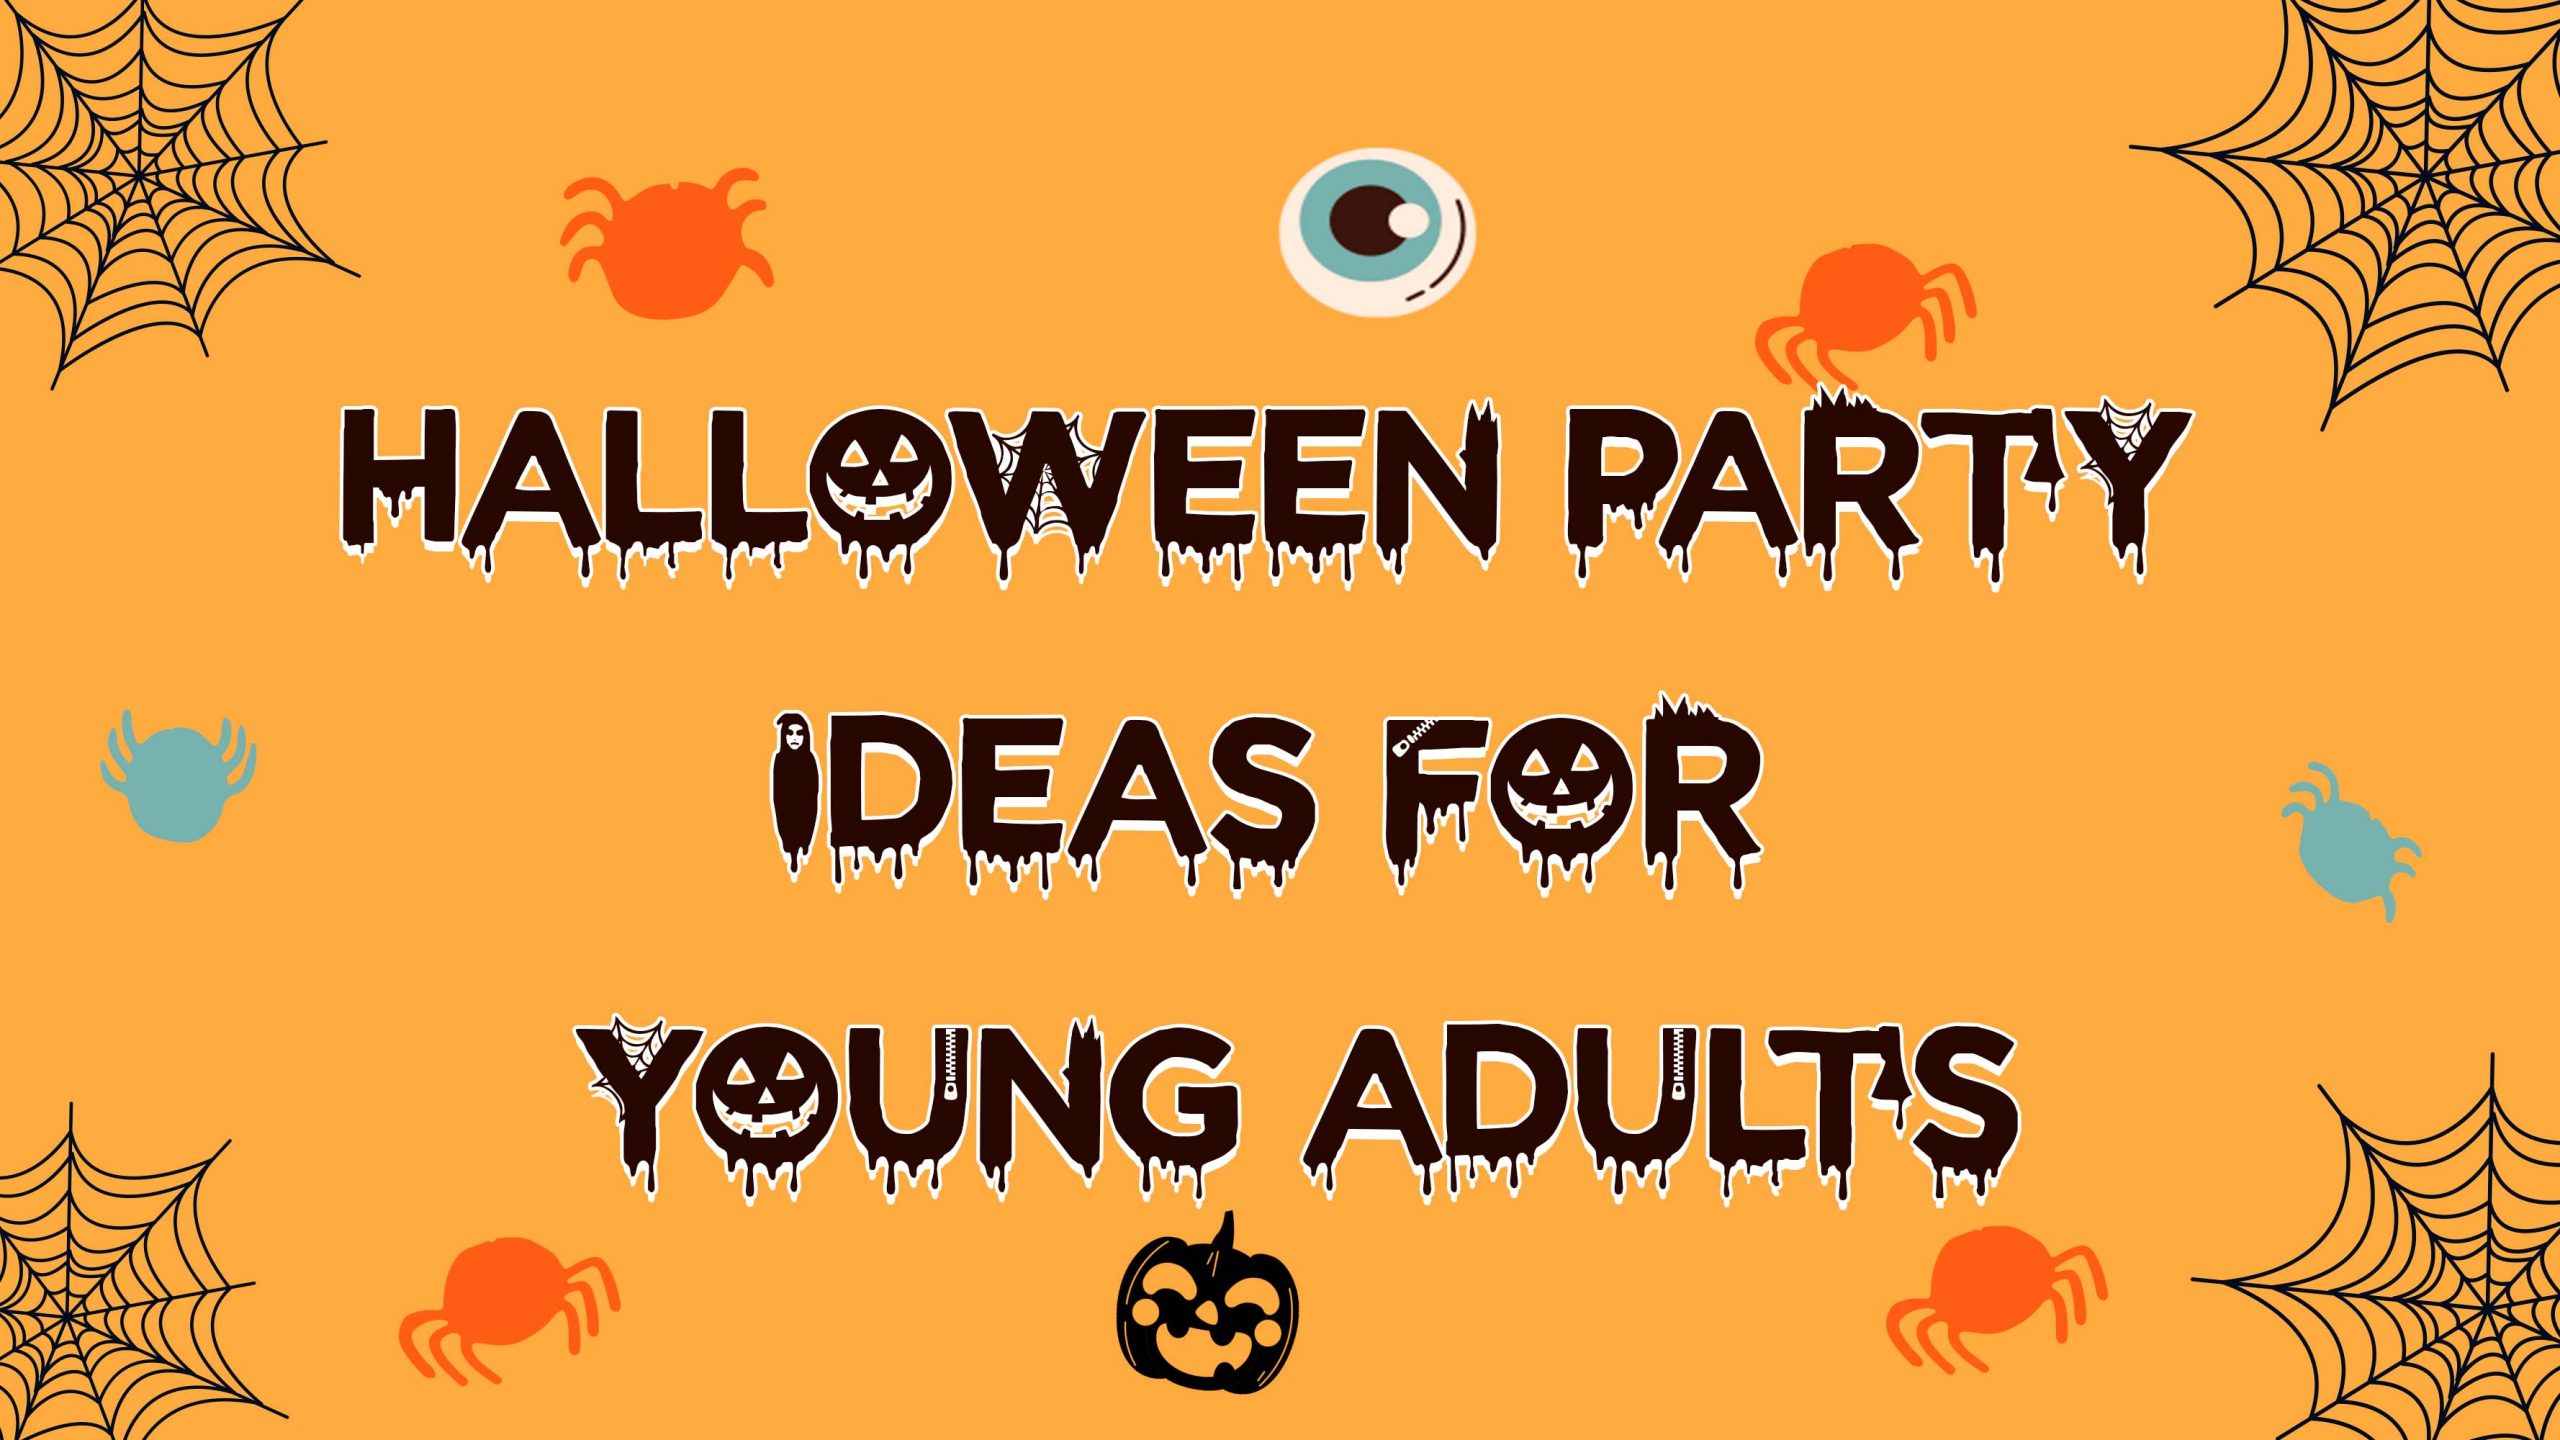 Halloween Party Ideas For Young Adults